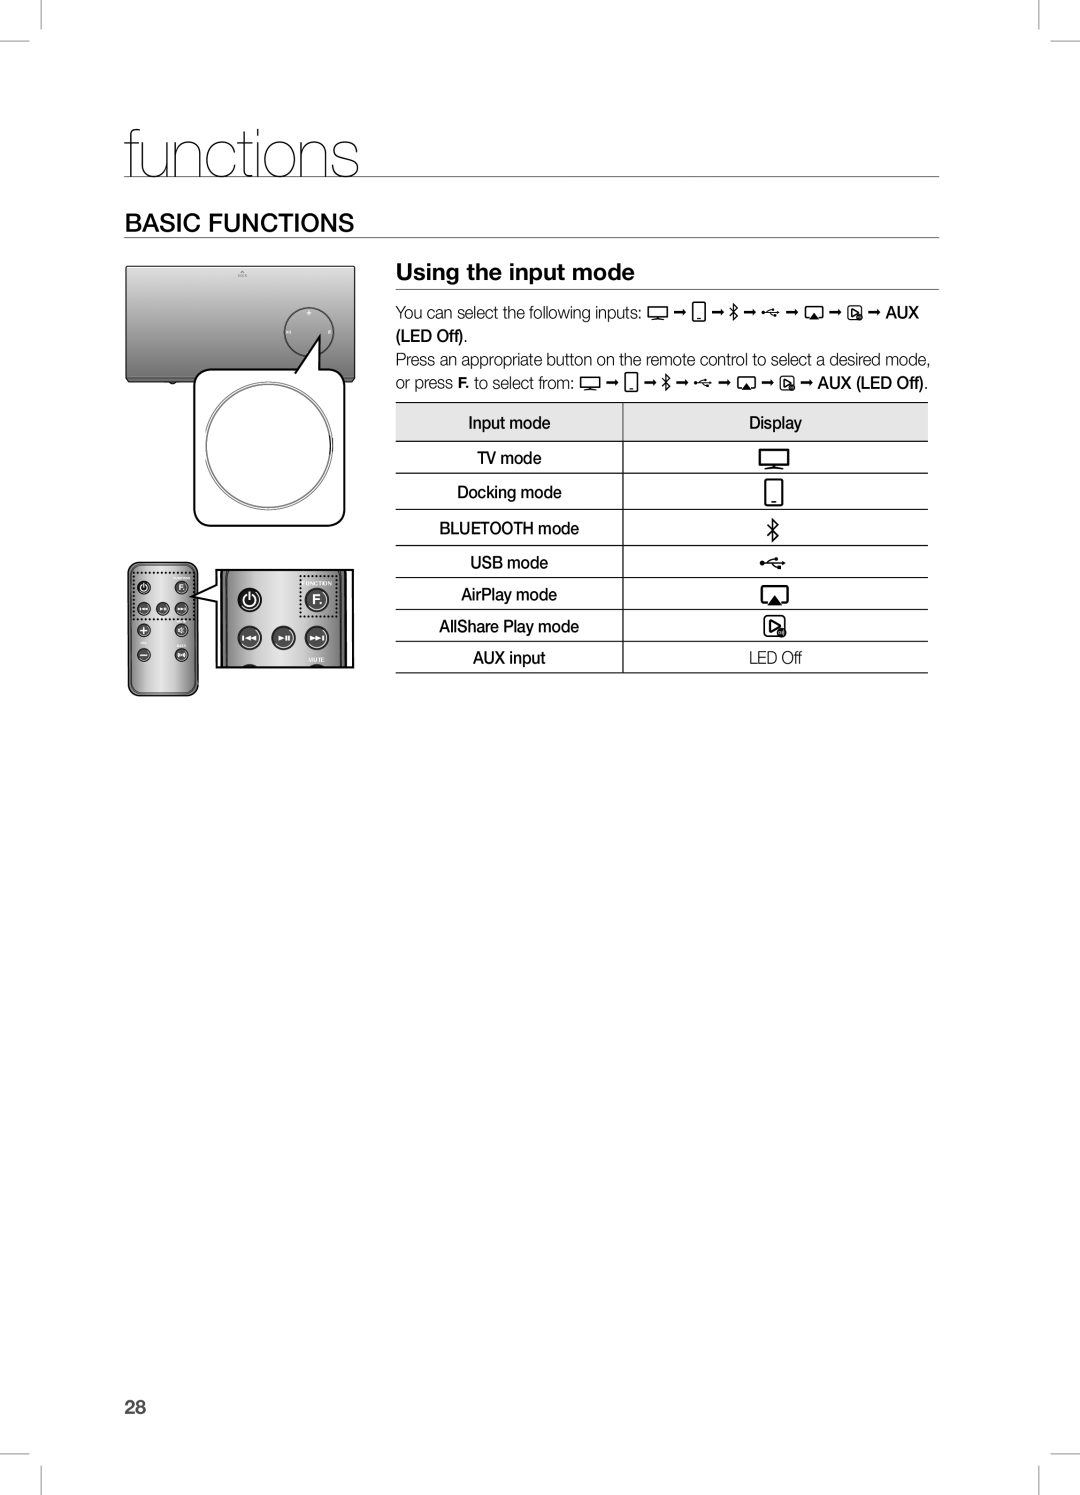 Samsung DA-E670 Functions, Basic fUnctions, Using the input mode, You can select the following inputs aUX Led off 